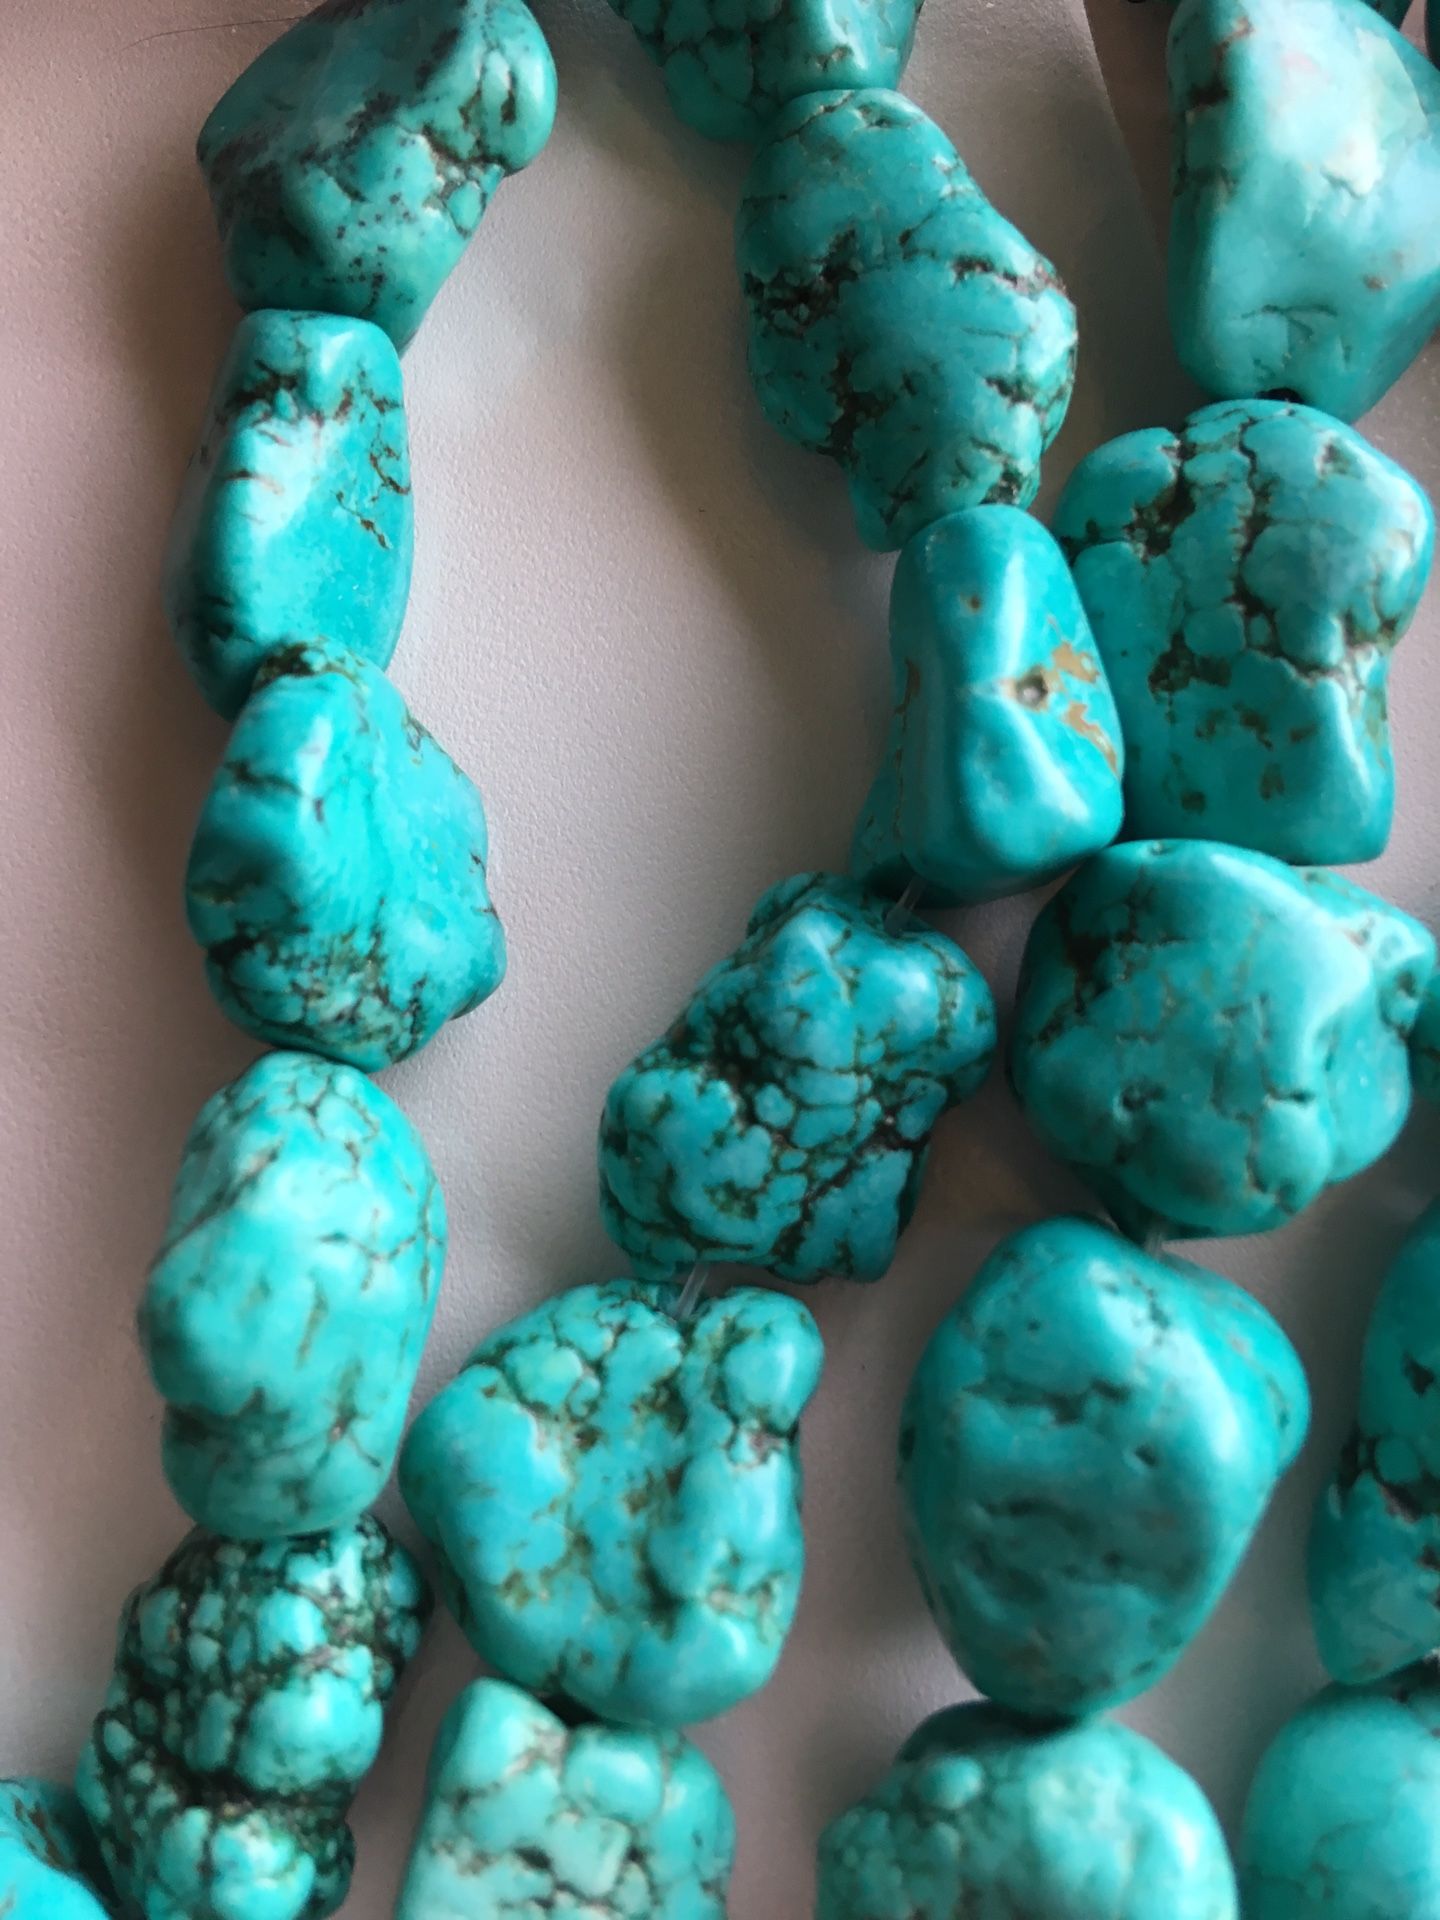 Turquoise Beads 1/2” to 1” New Beads